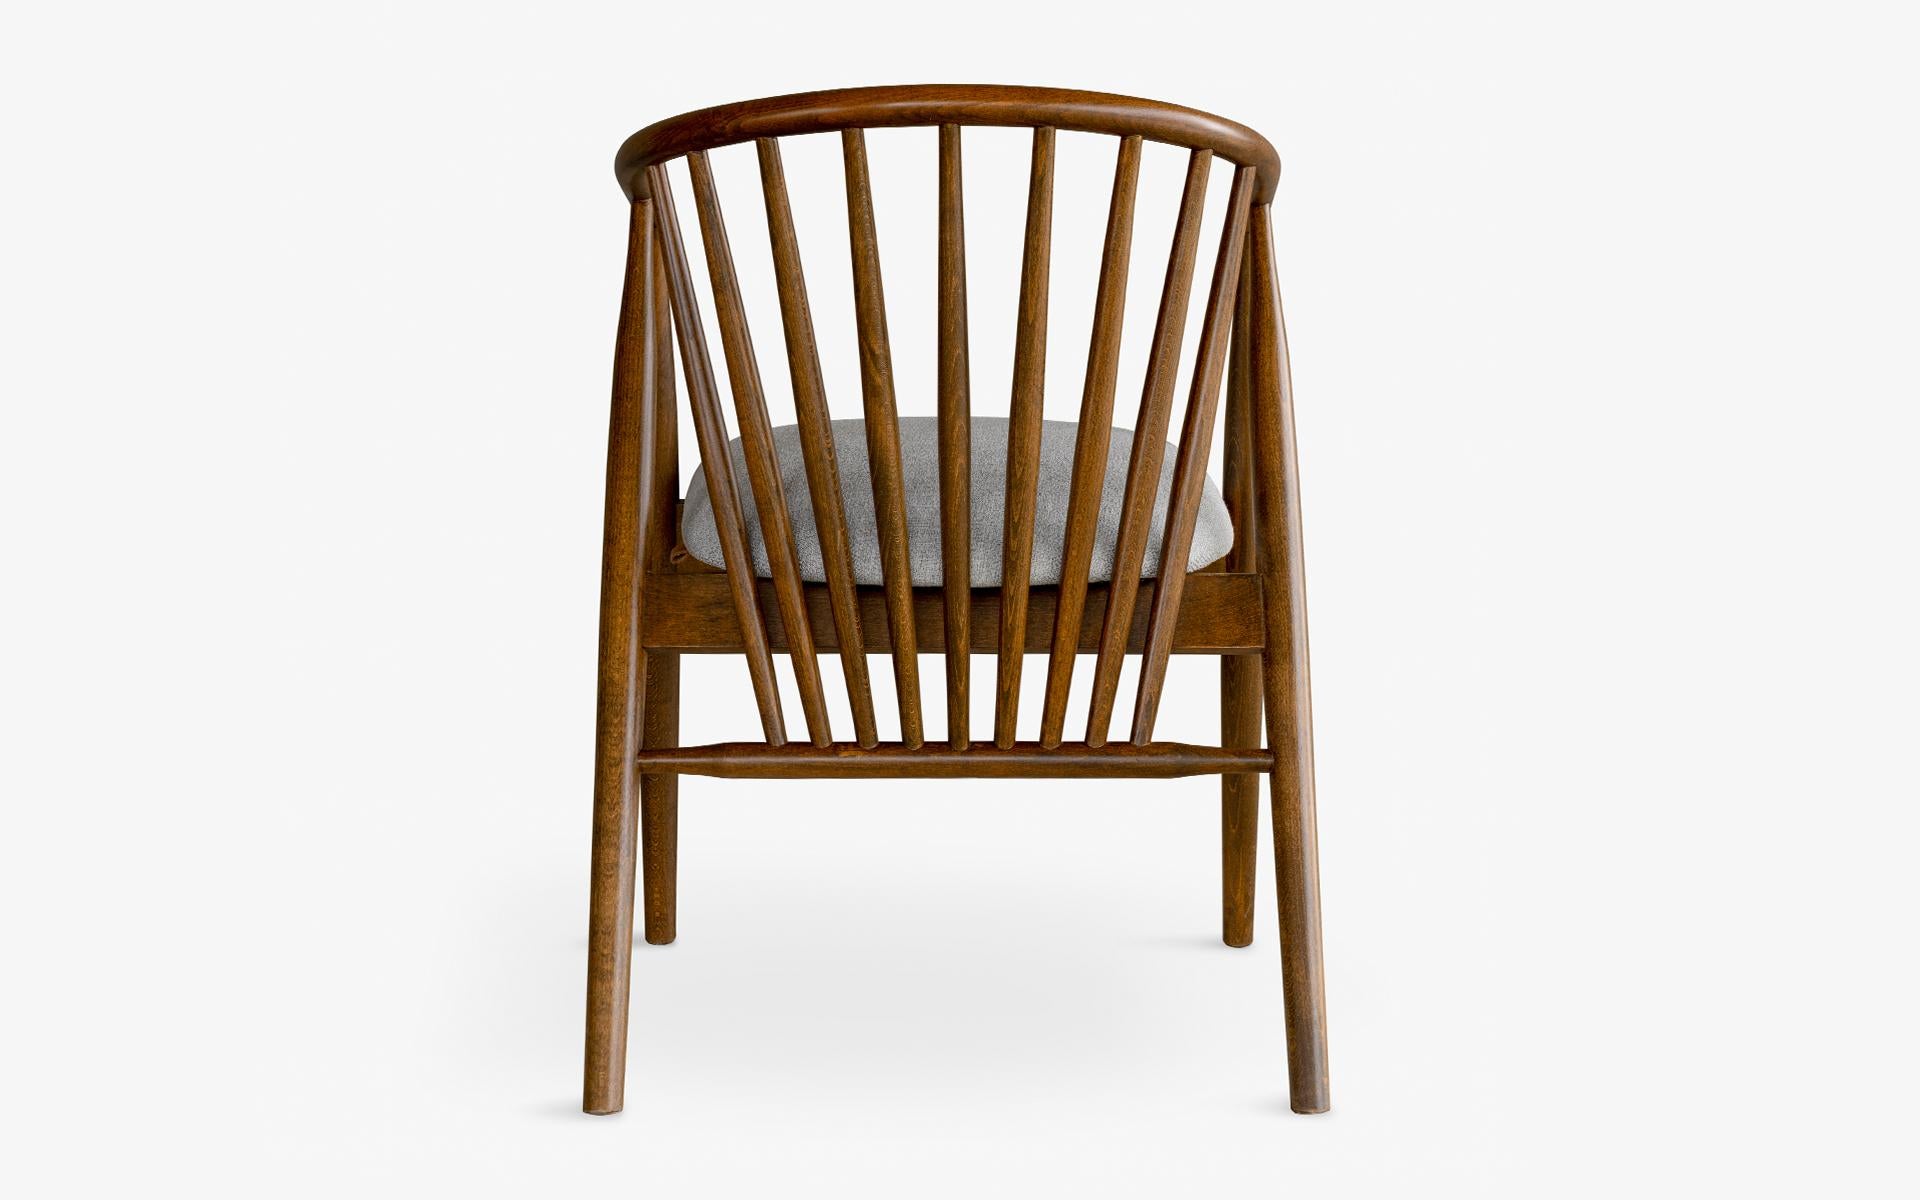 Woodwork Kago Wooden Dining Chair, Lagu Selection in Stock For Sale